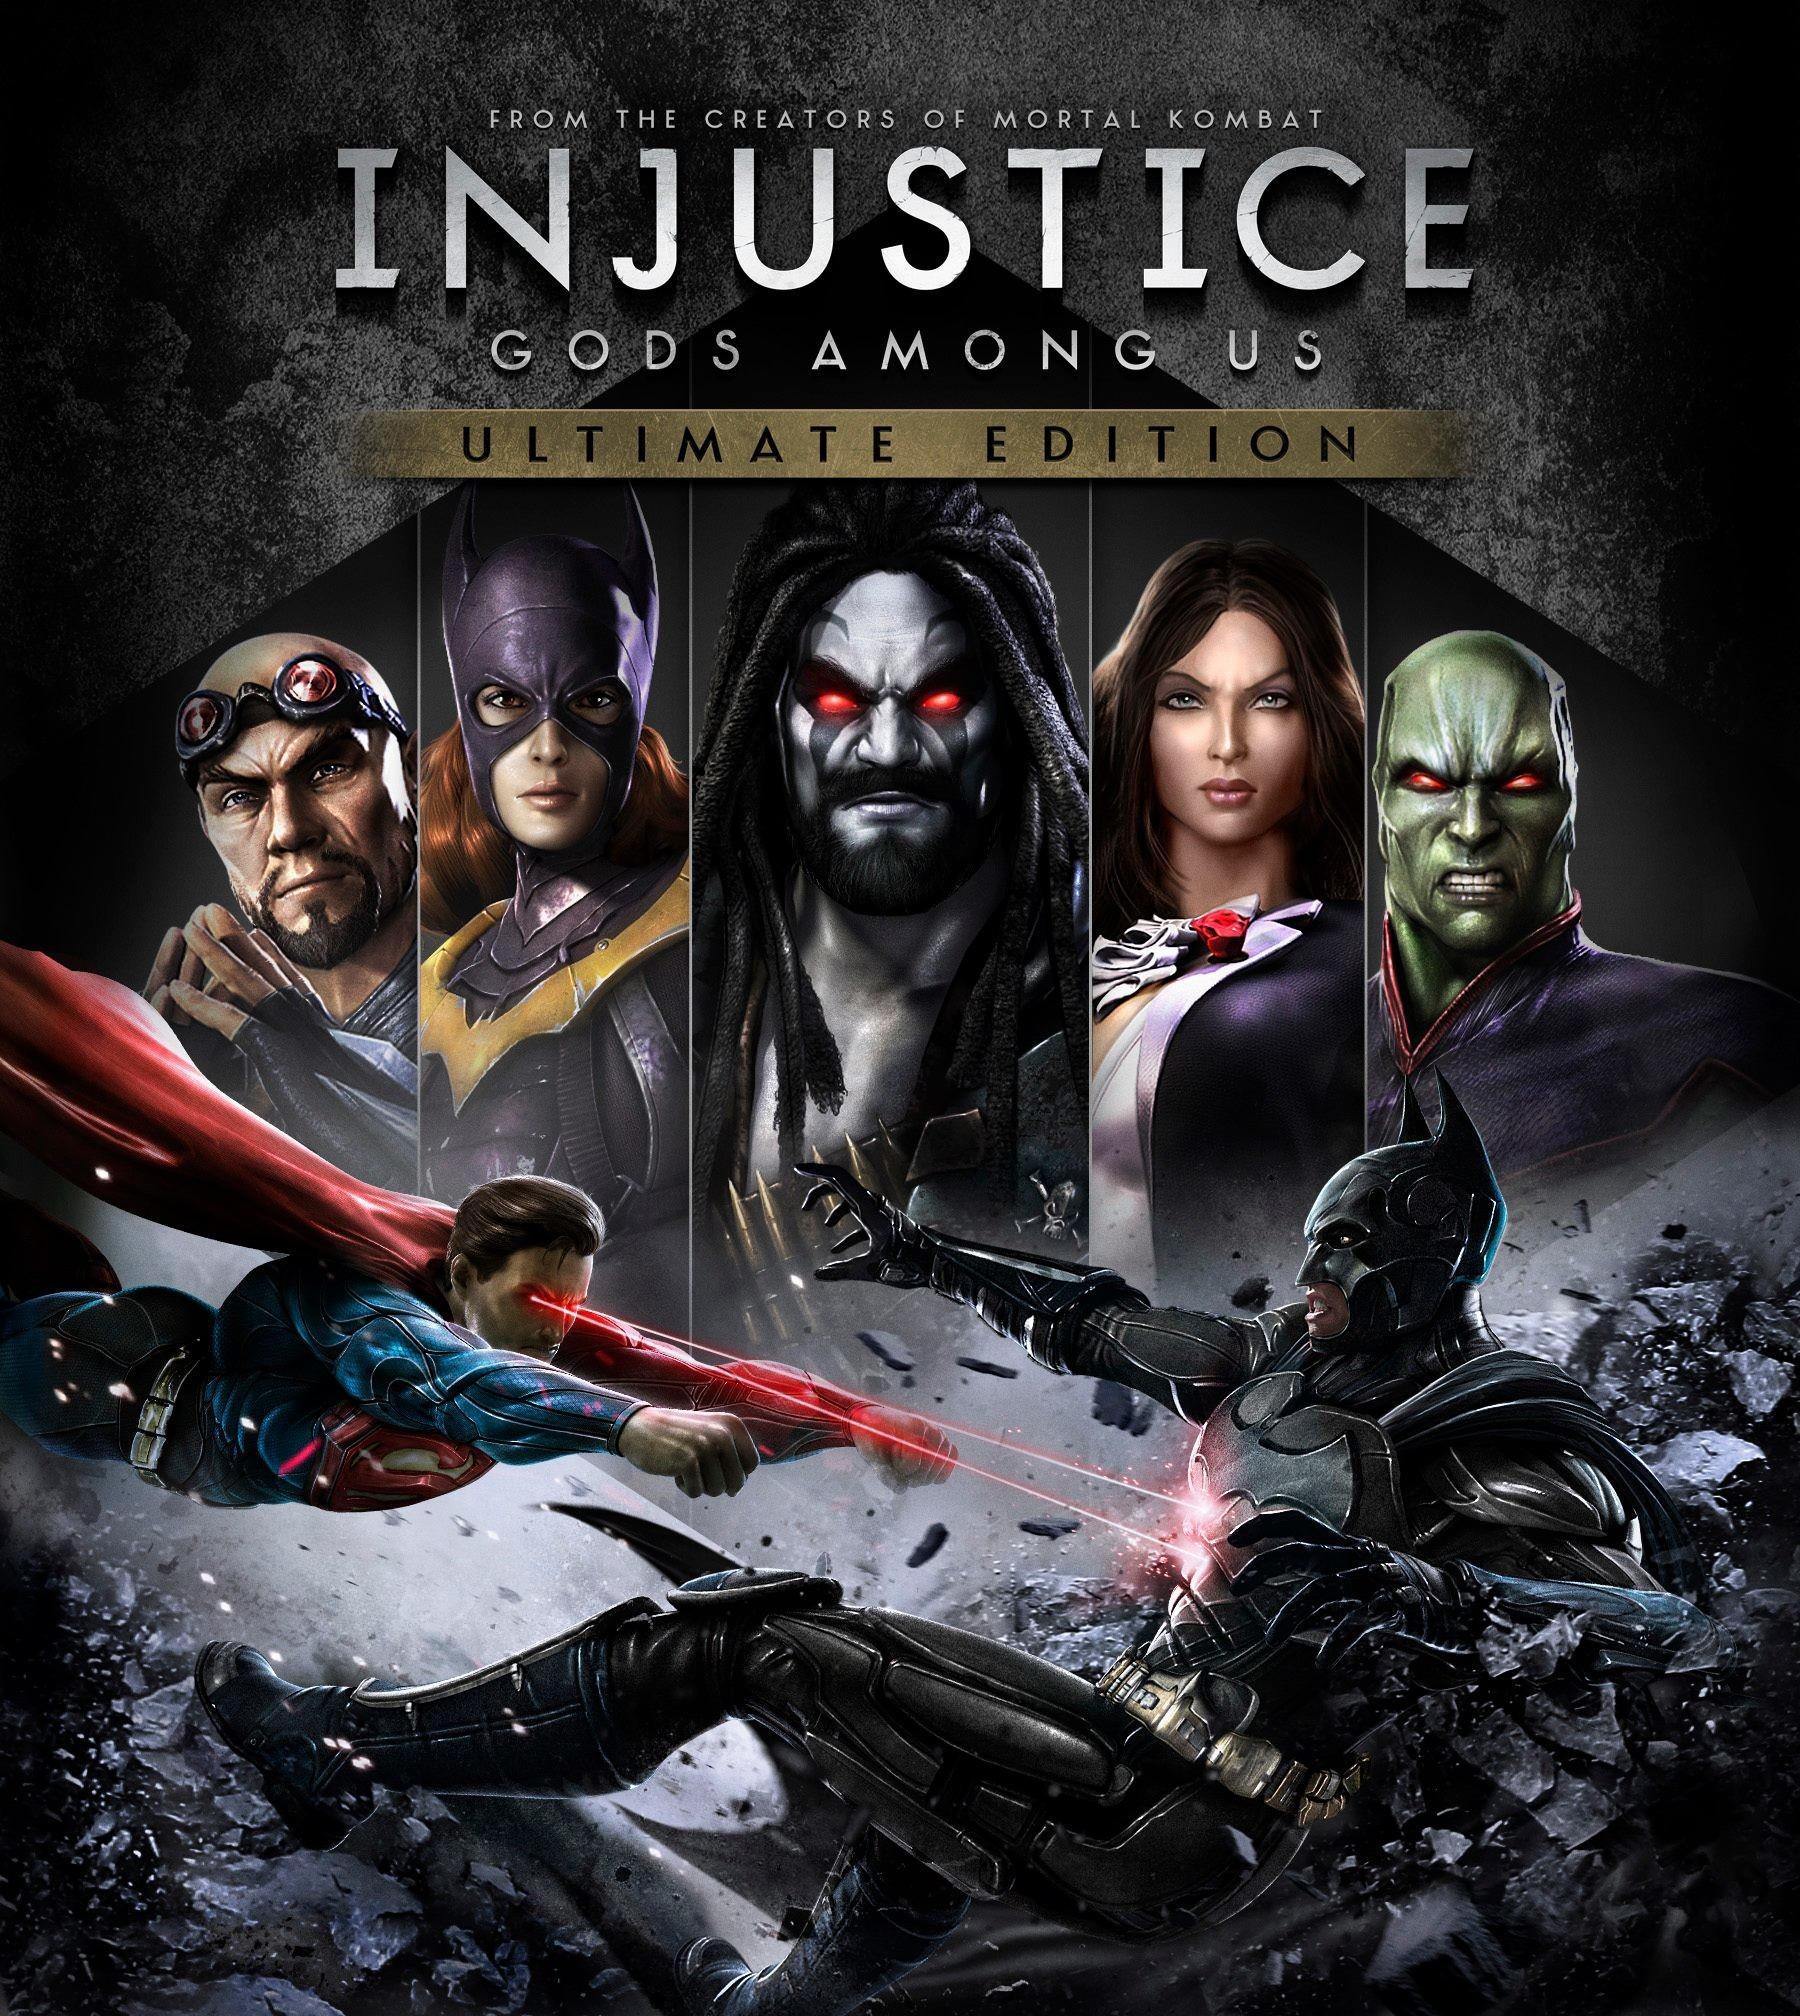 1800 x 2016 · jpeg - Injustice Gods Among Us Wallpapers (85+ images)